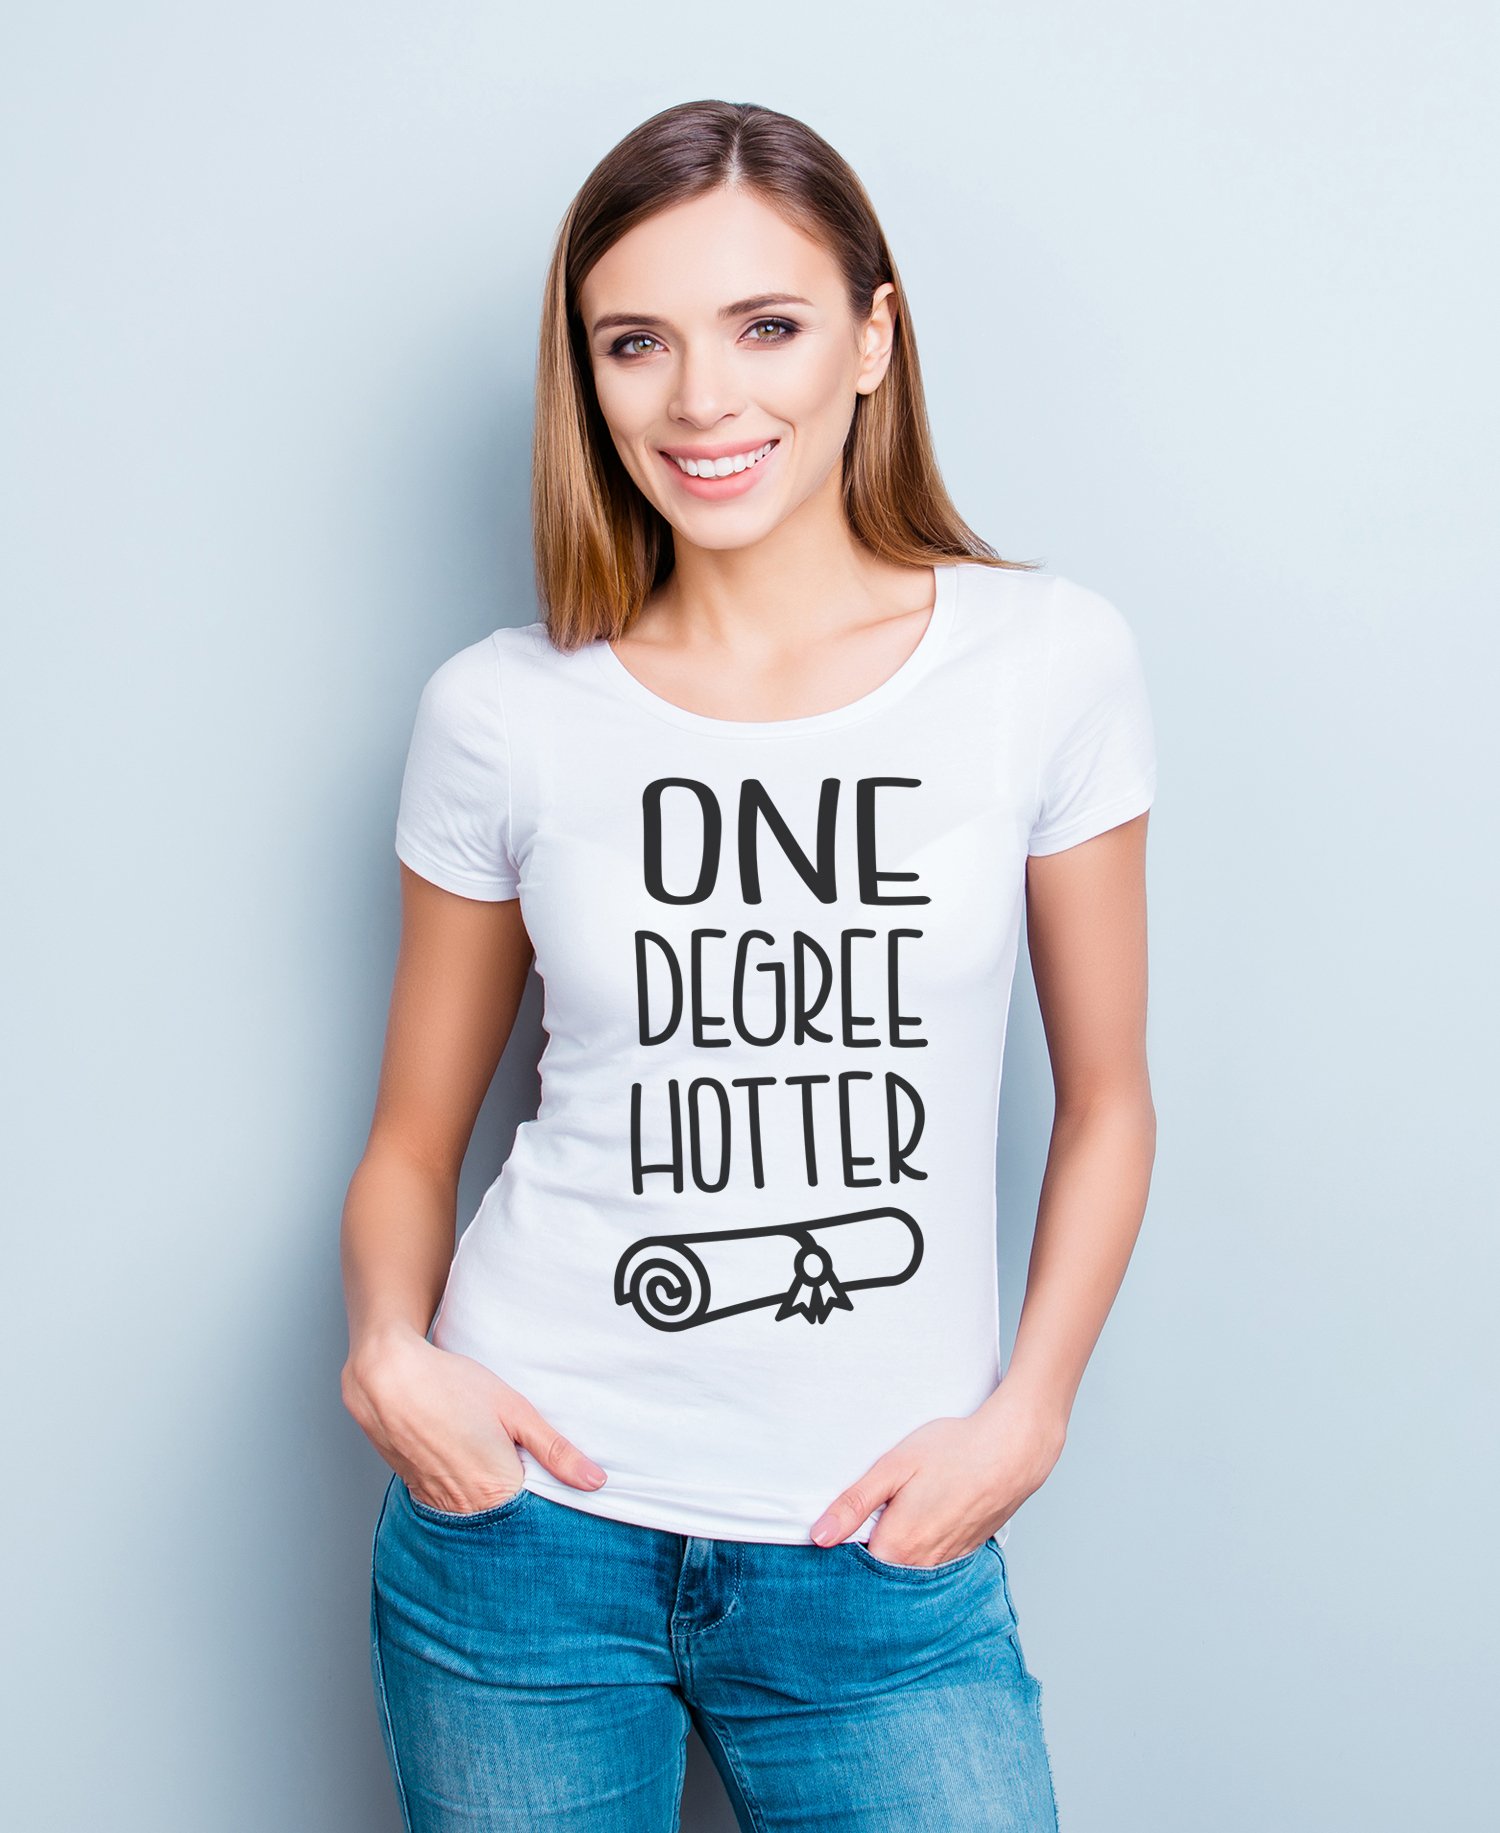 Girl in "One Degree Hotter" graduation t-shirt